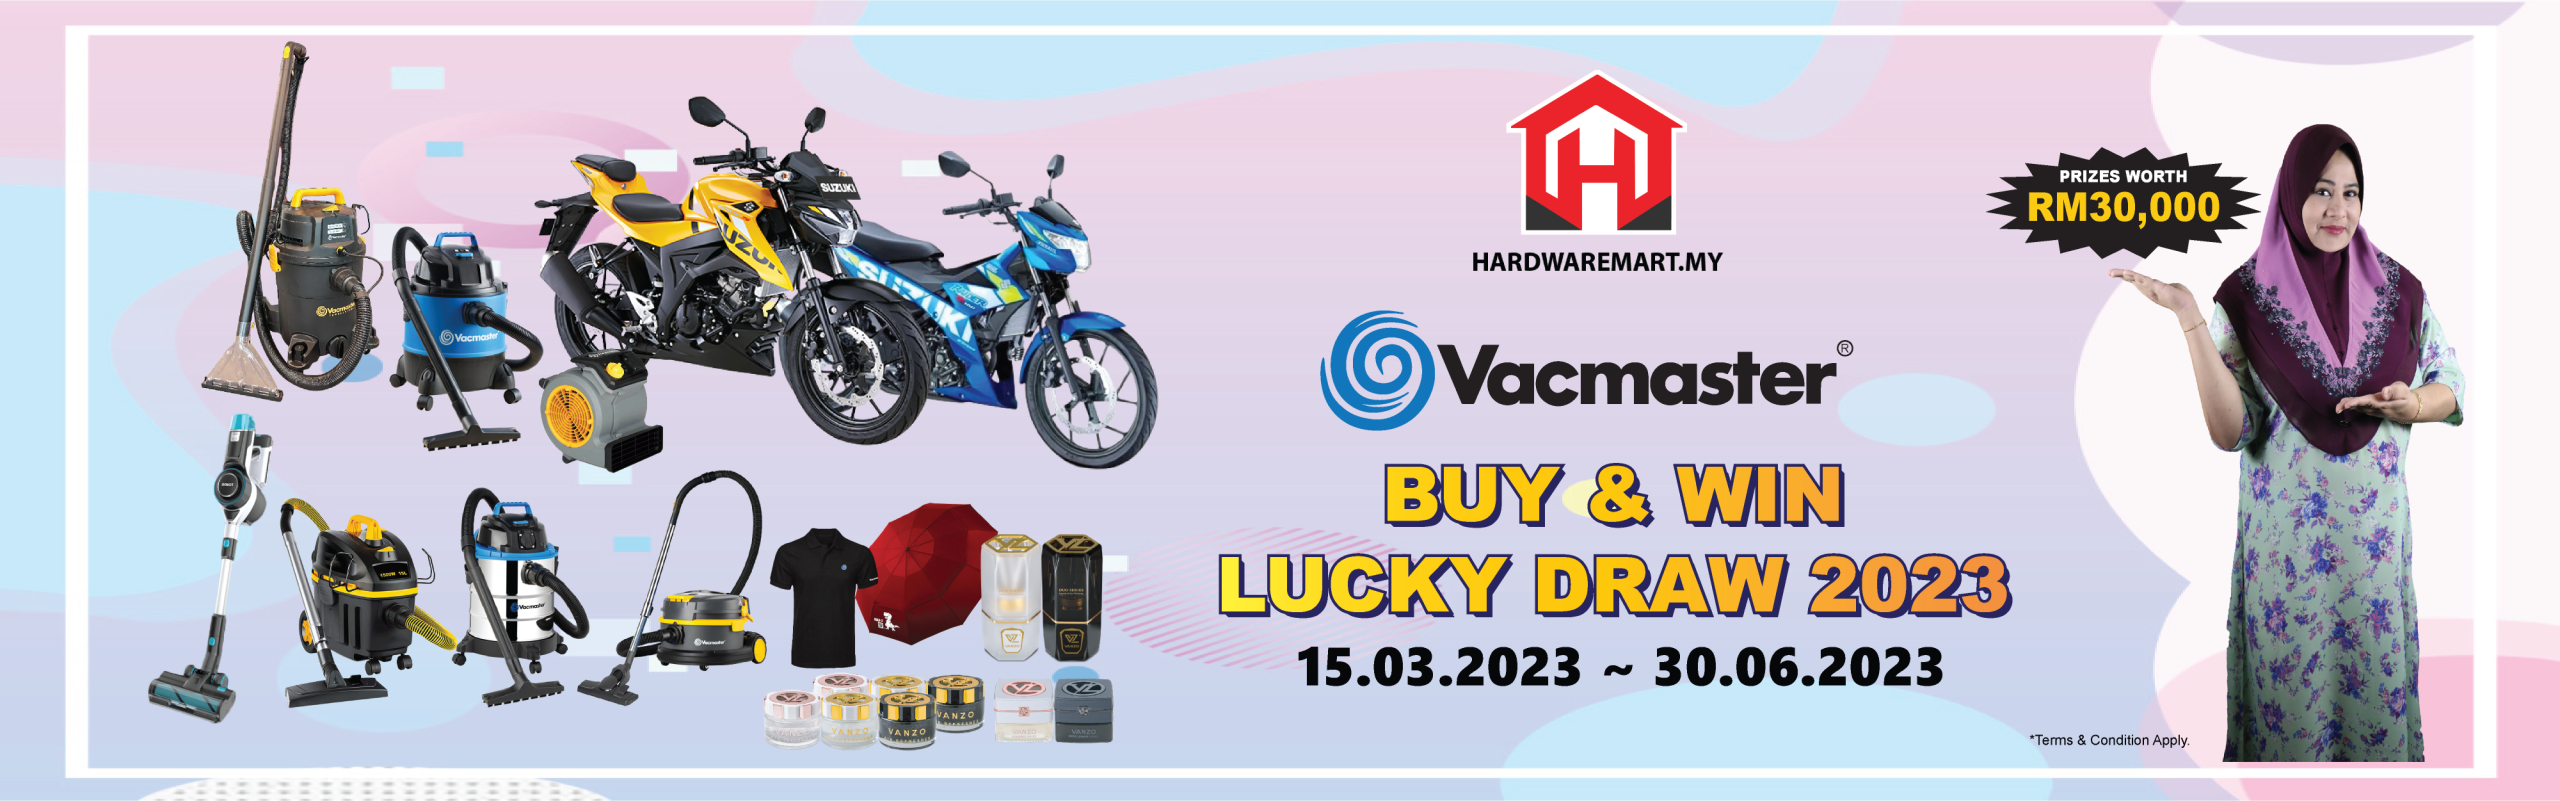 Vacmaster Buy & Win Lucky Draw Contest 2023